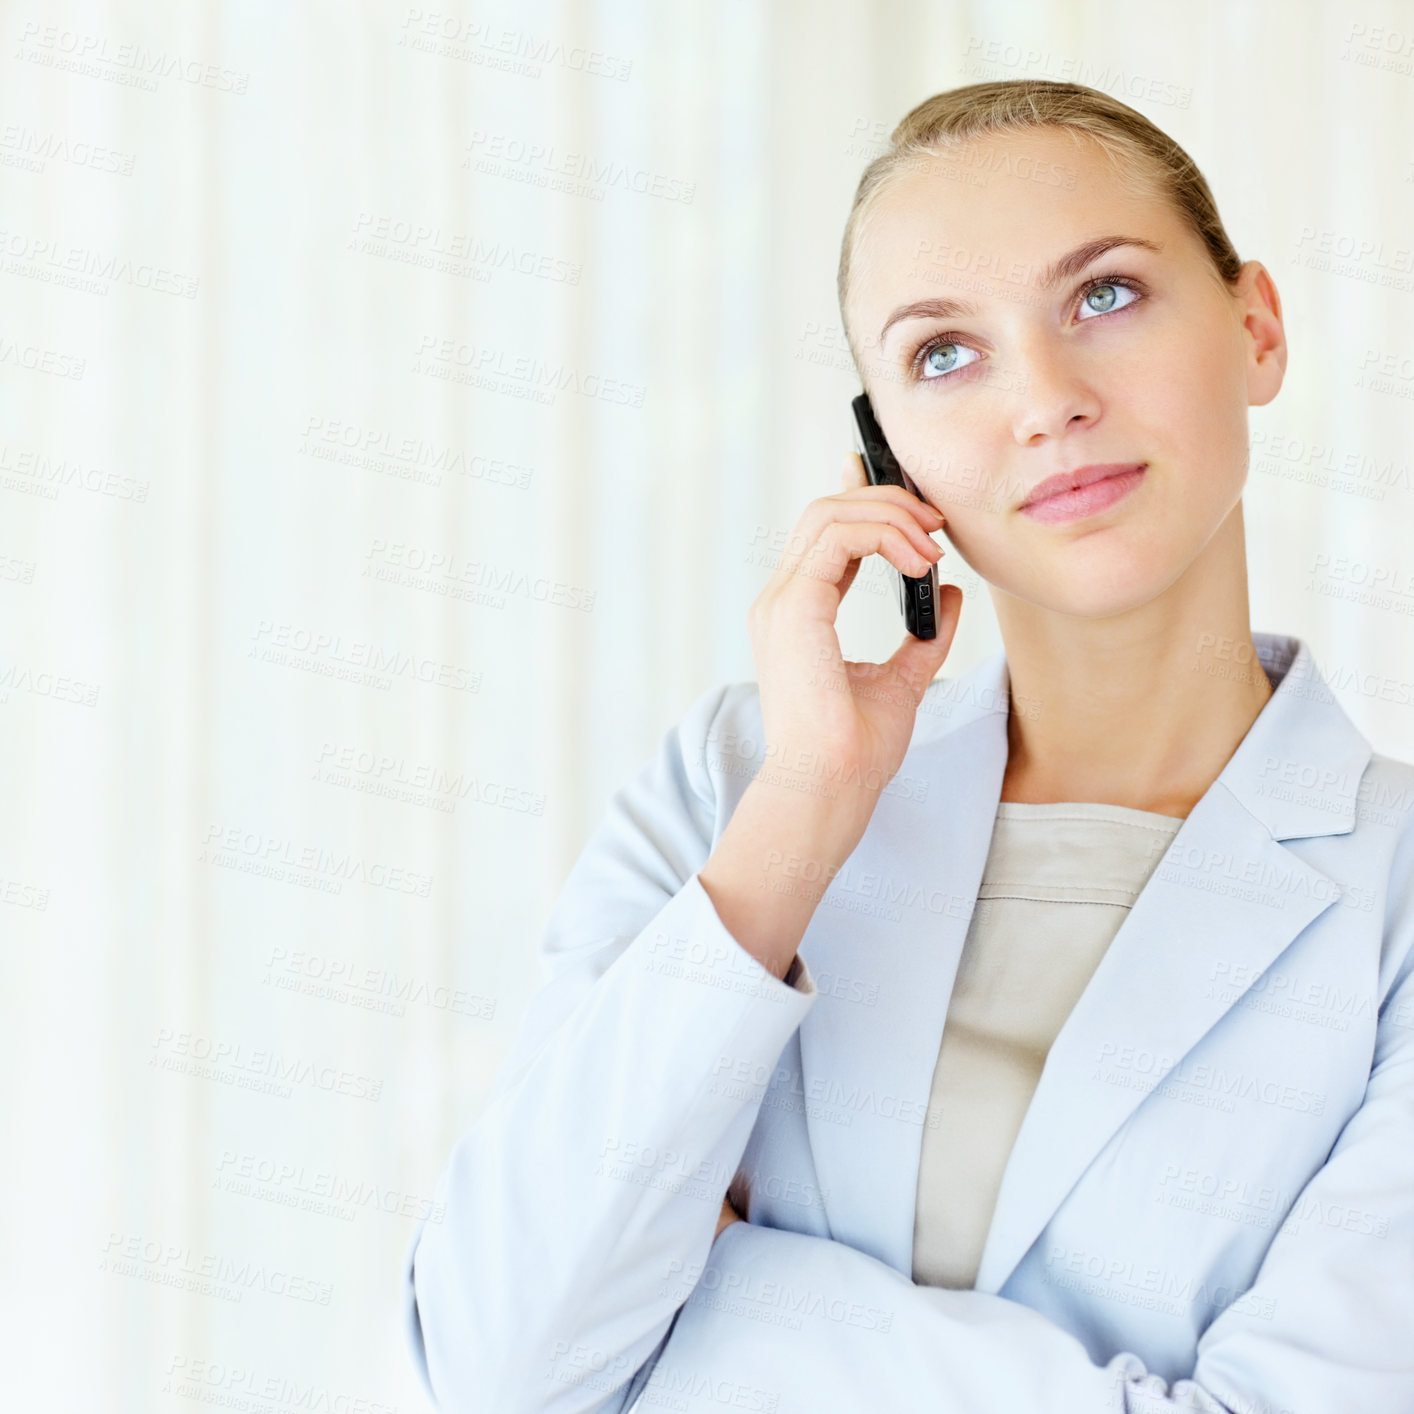 Buy stock photo Young pretty business woman speaking over the cellphone